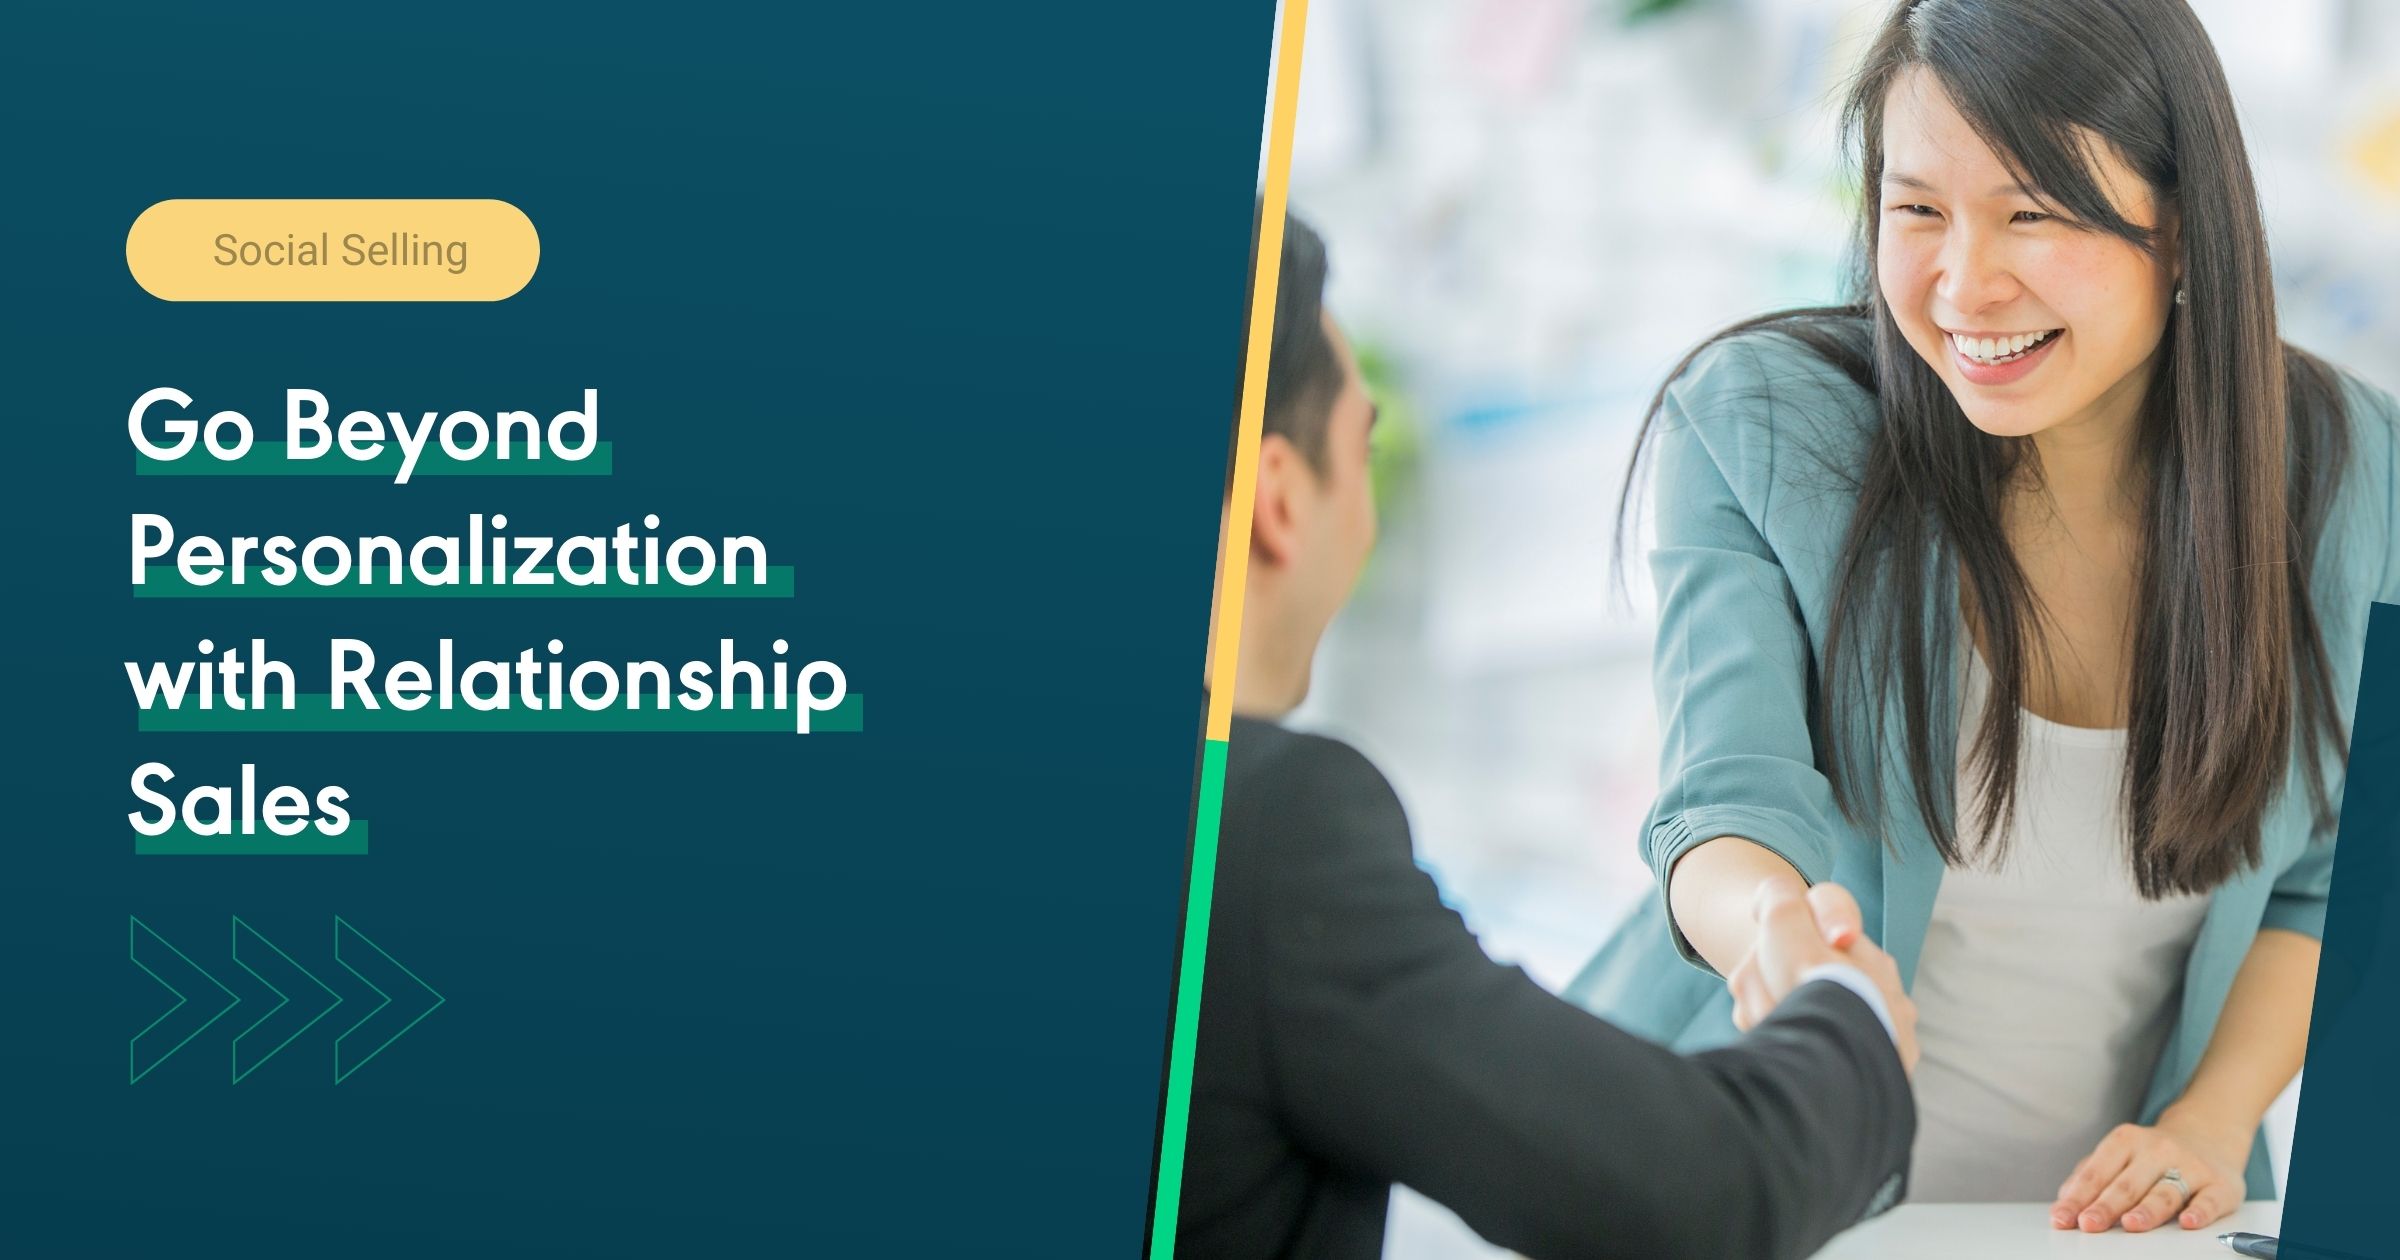 Go Beyond Personalization with Relationship Sales